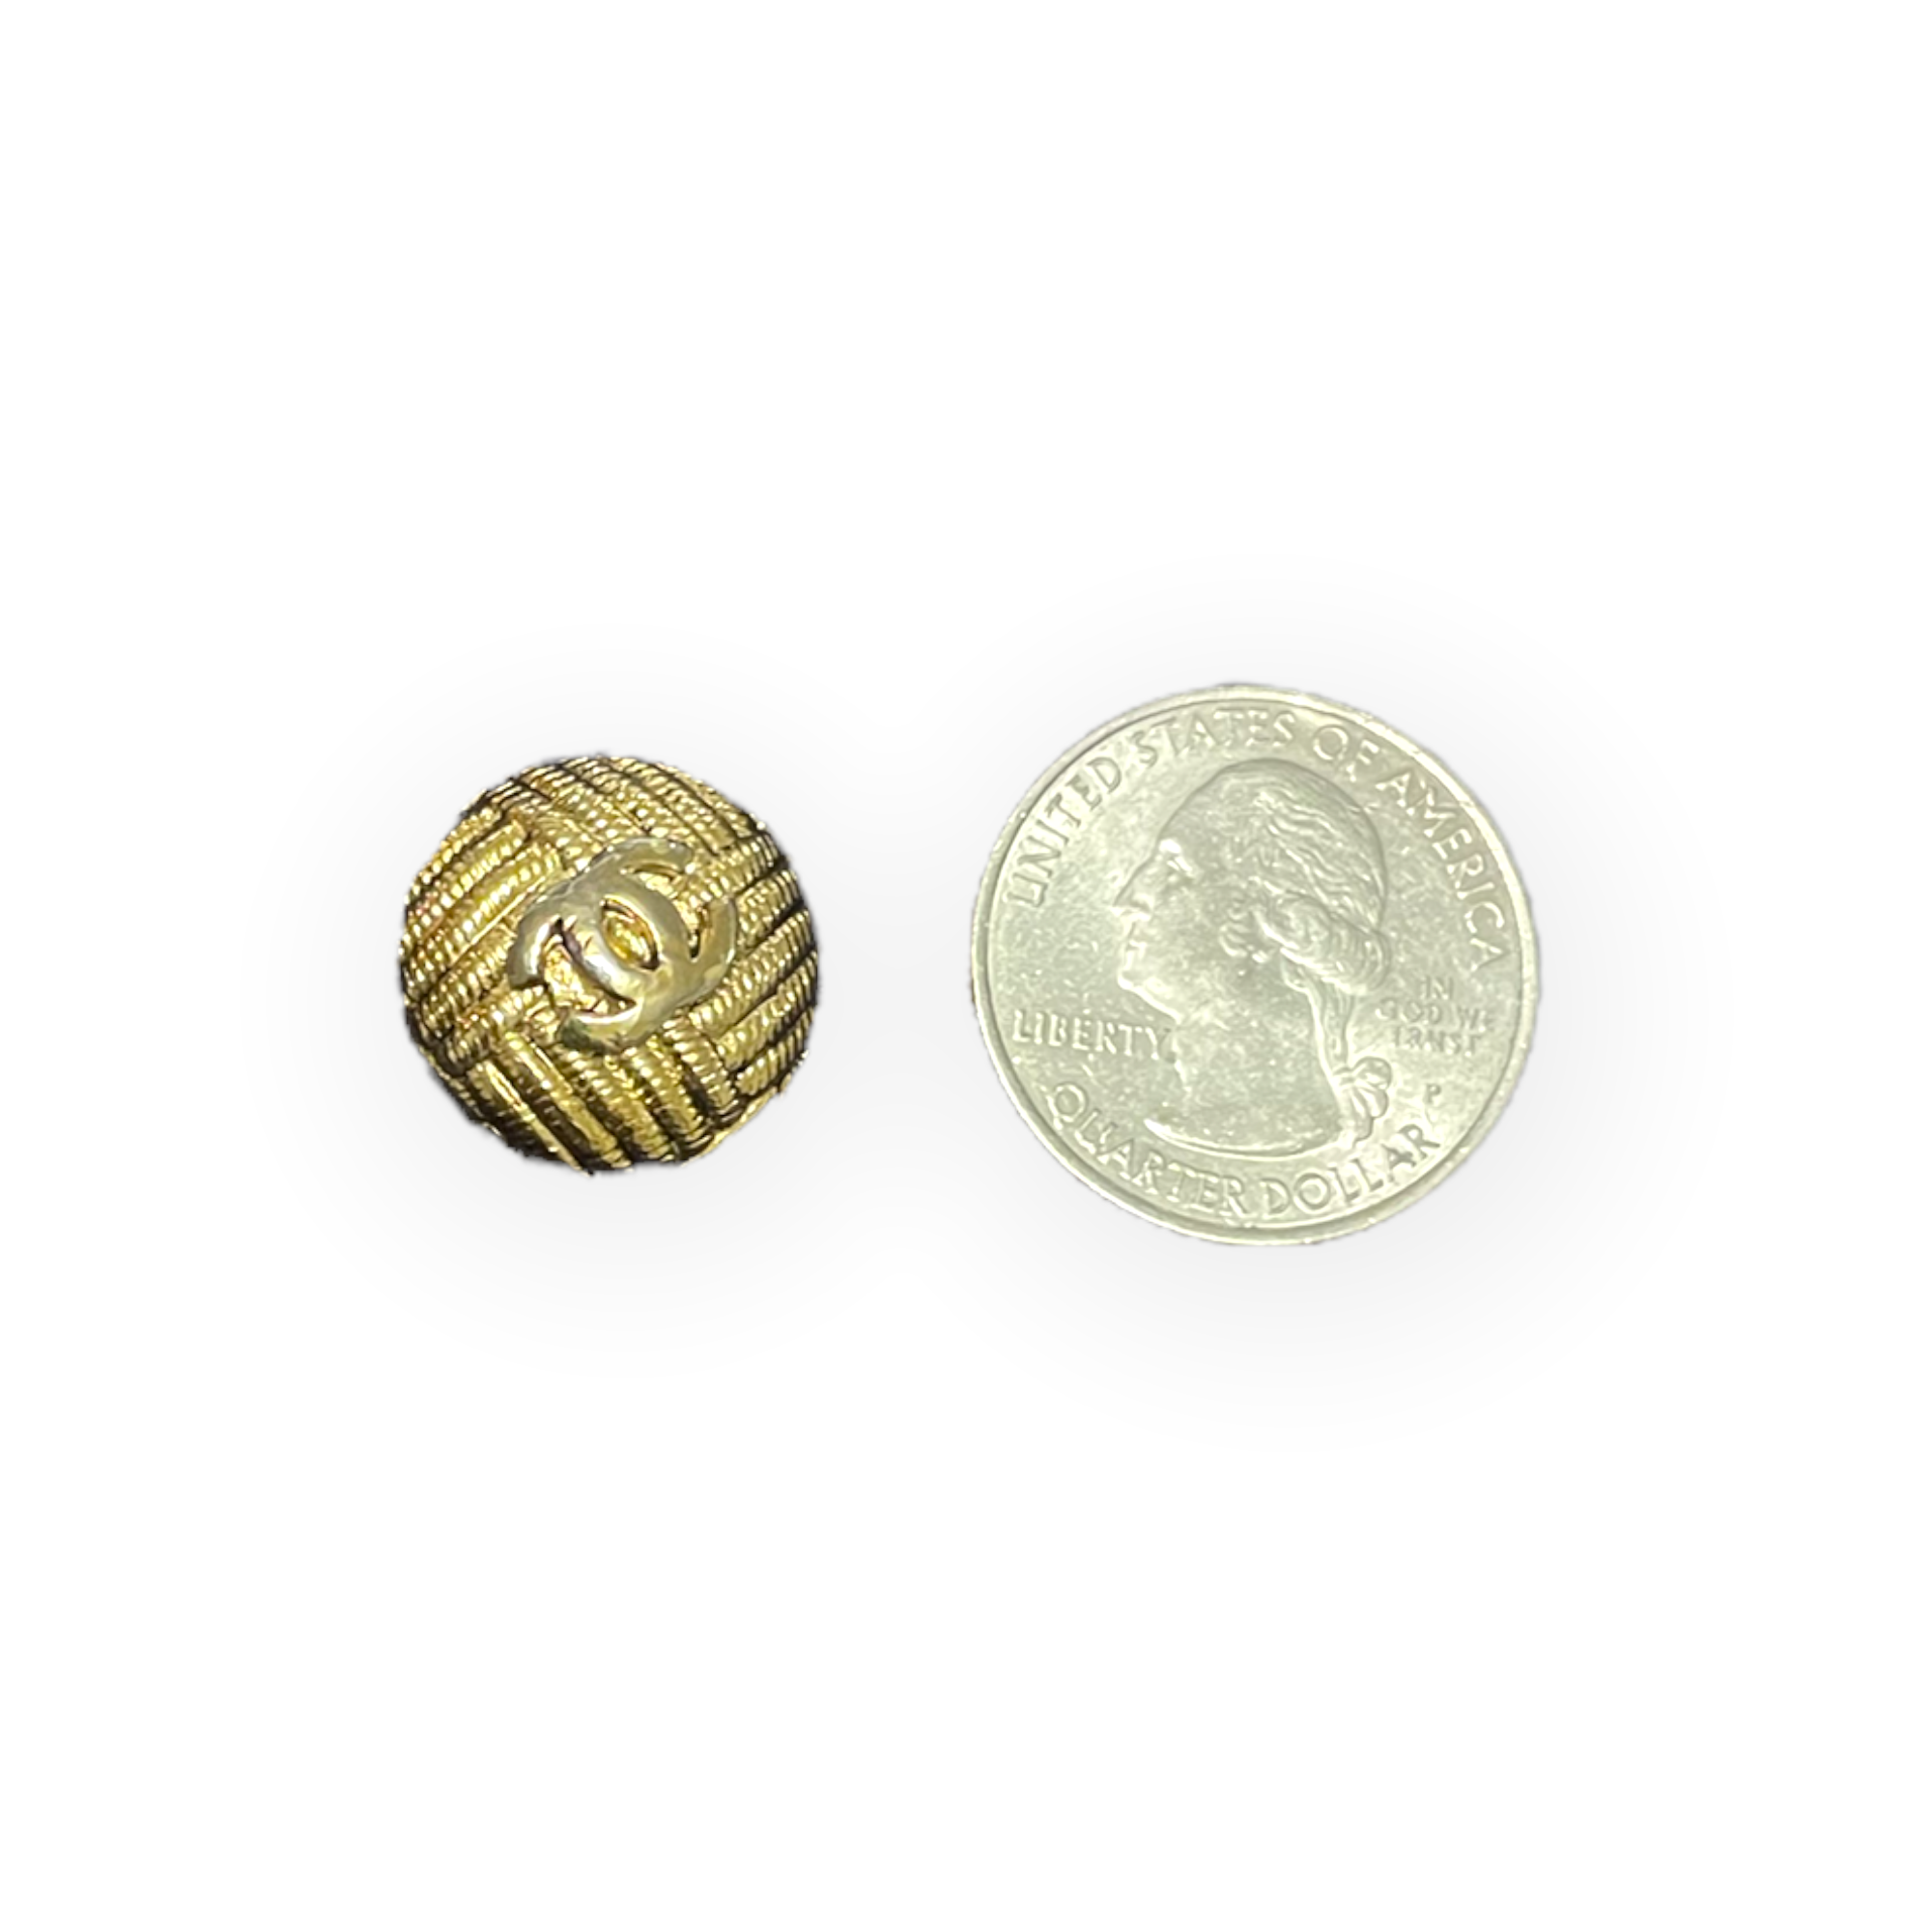 Two AUTHENTIC CHANEL Gold Tone Metal with interlocking CC logo and embossed woven design Buttons